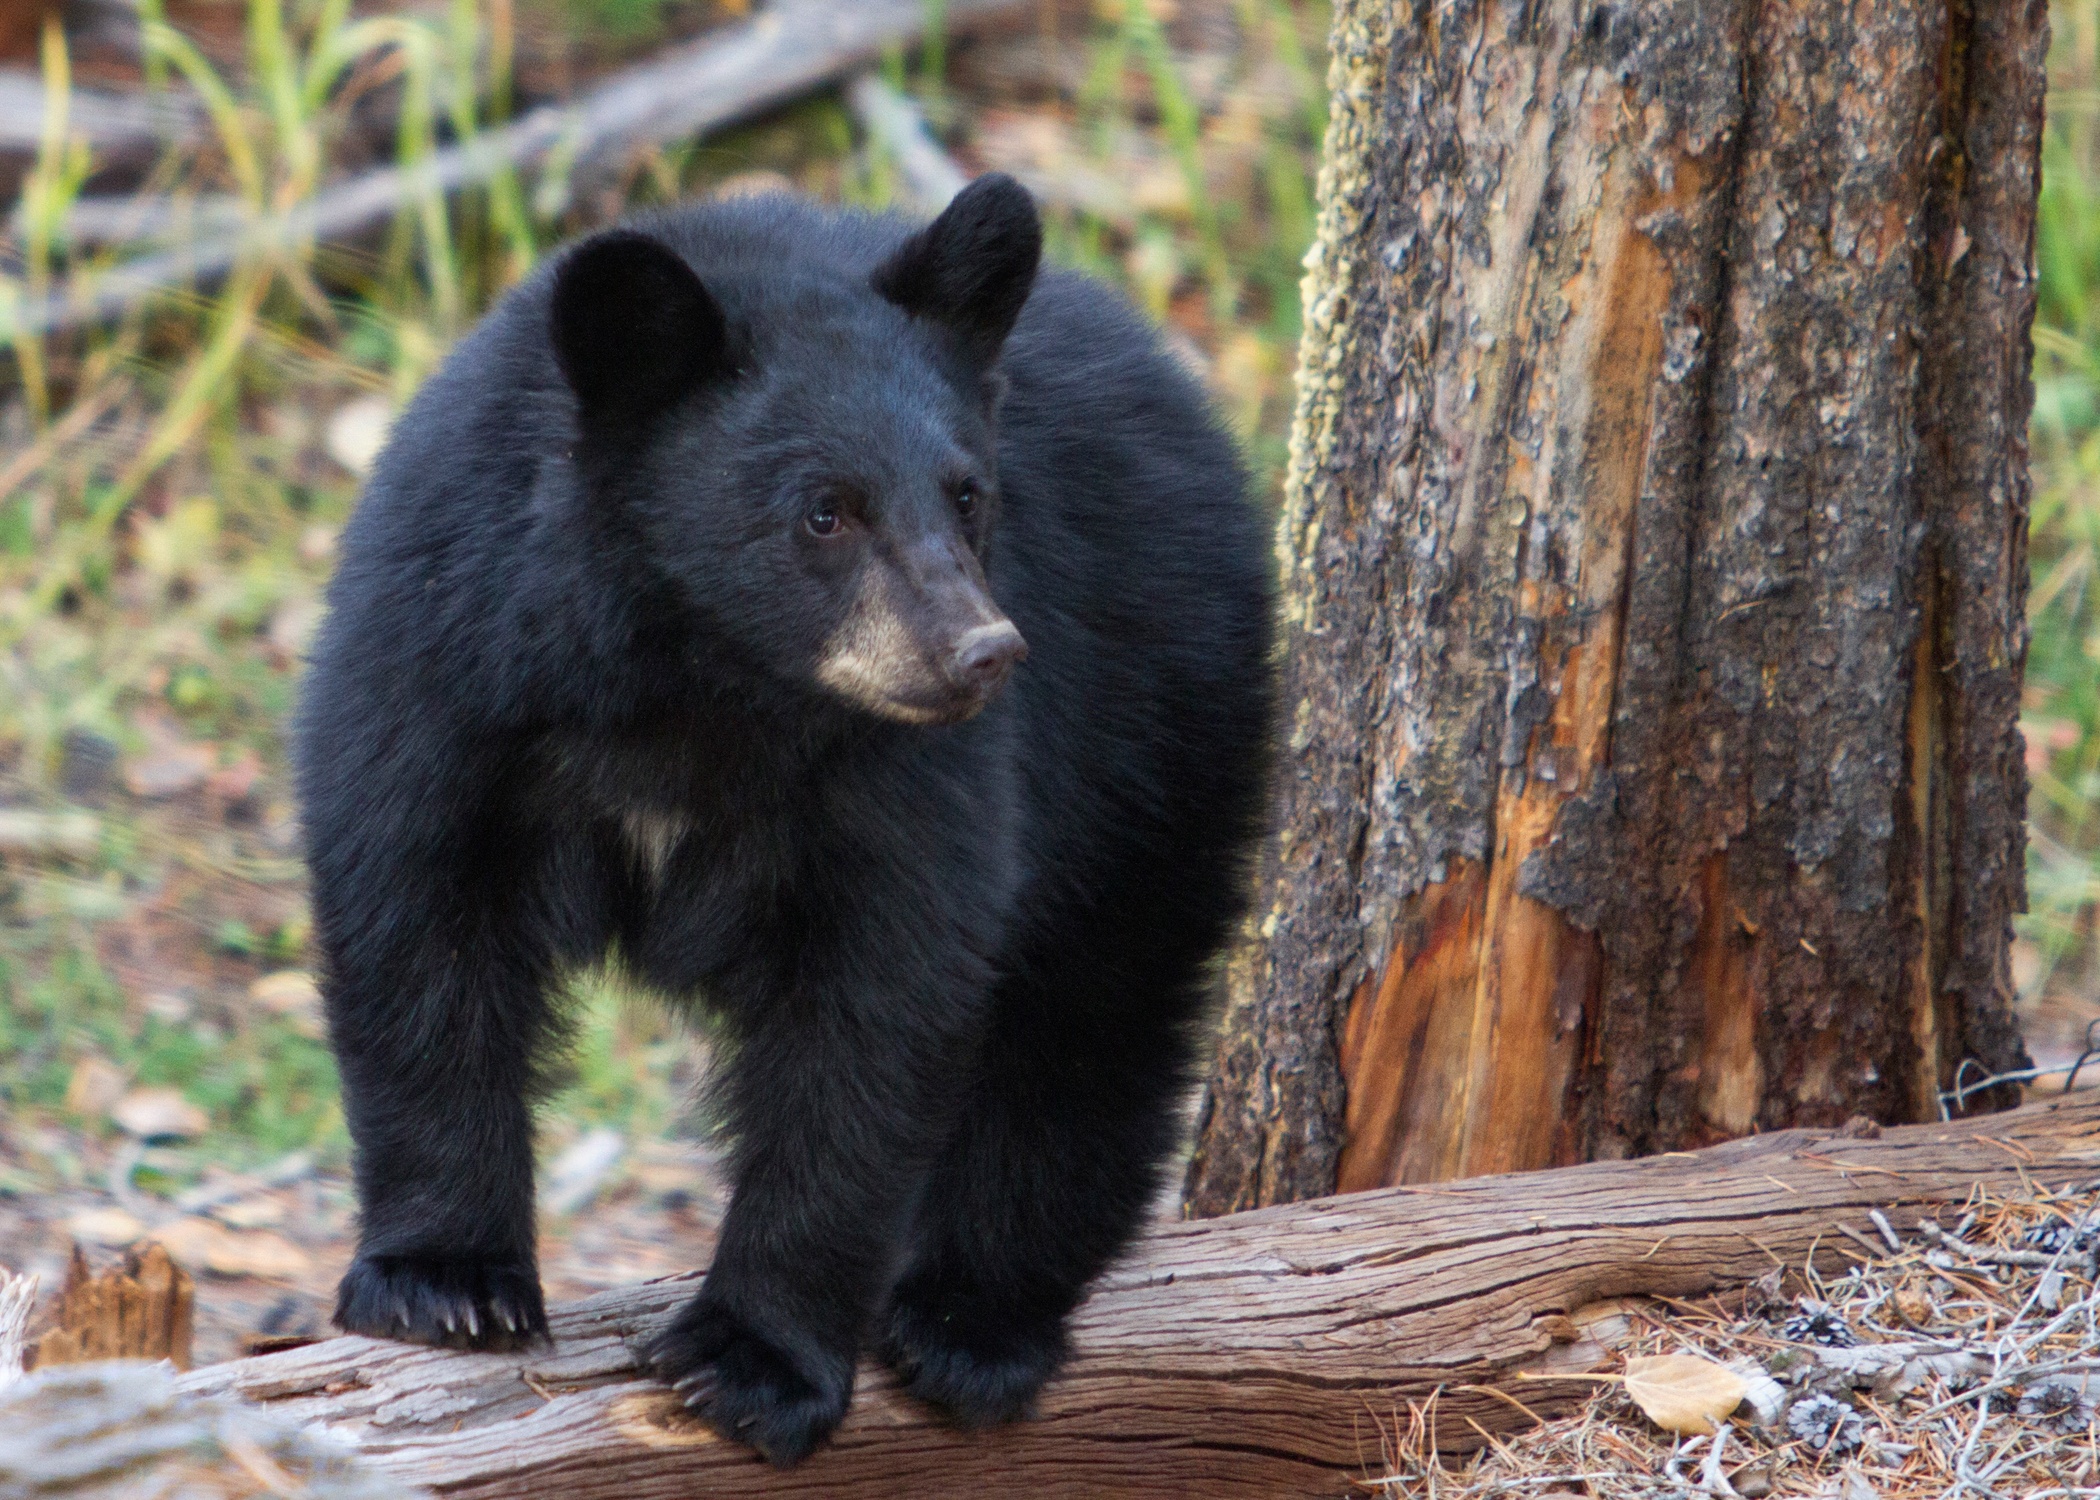 A bear with black fur pauses on top of a fallen tree trunk.